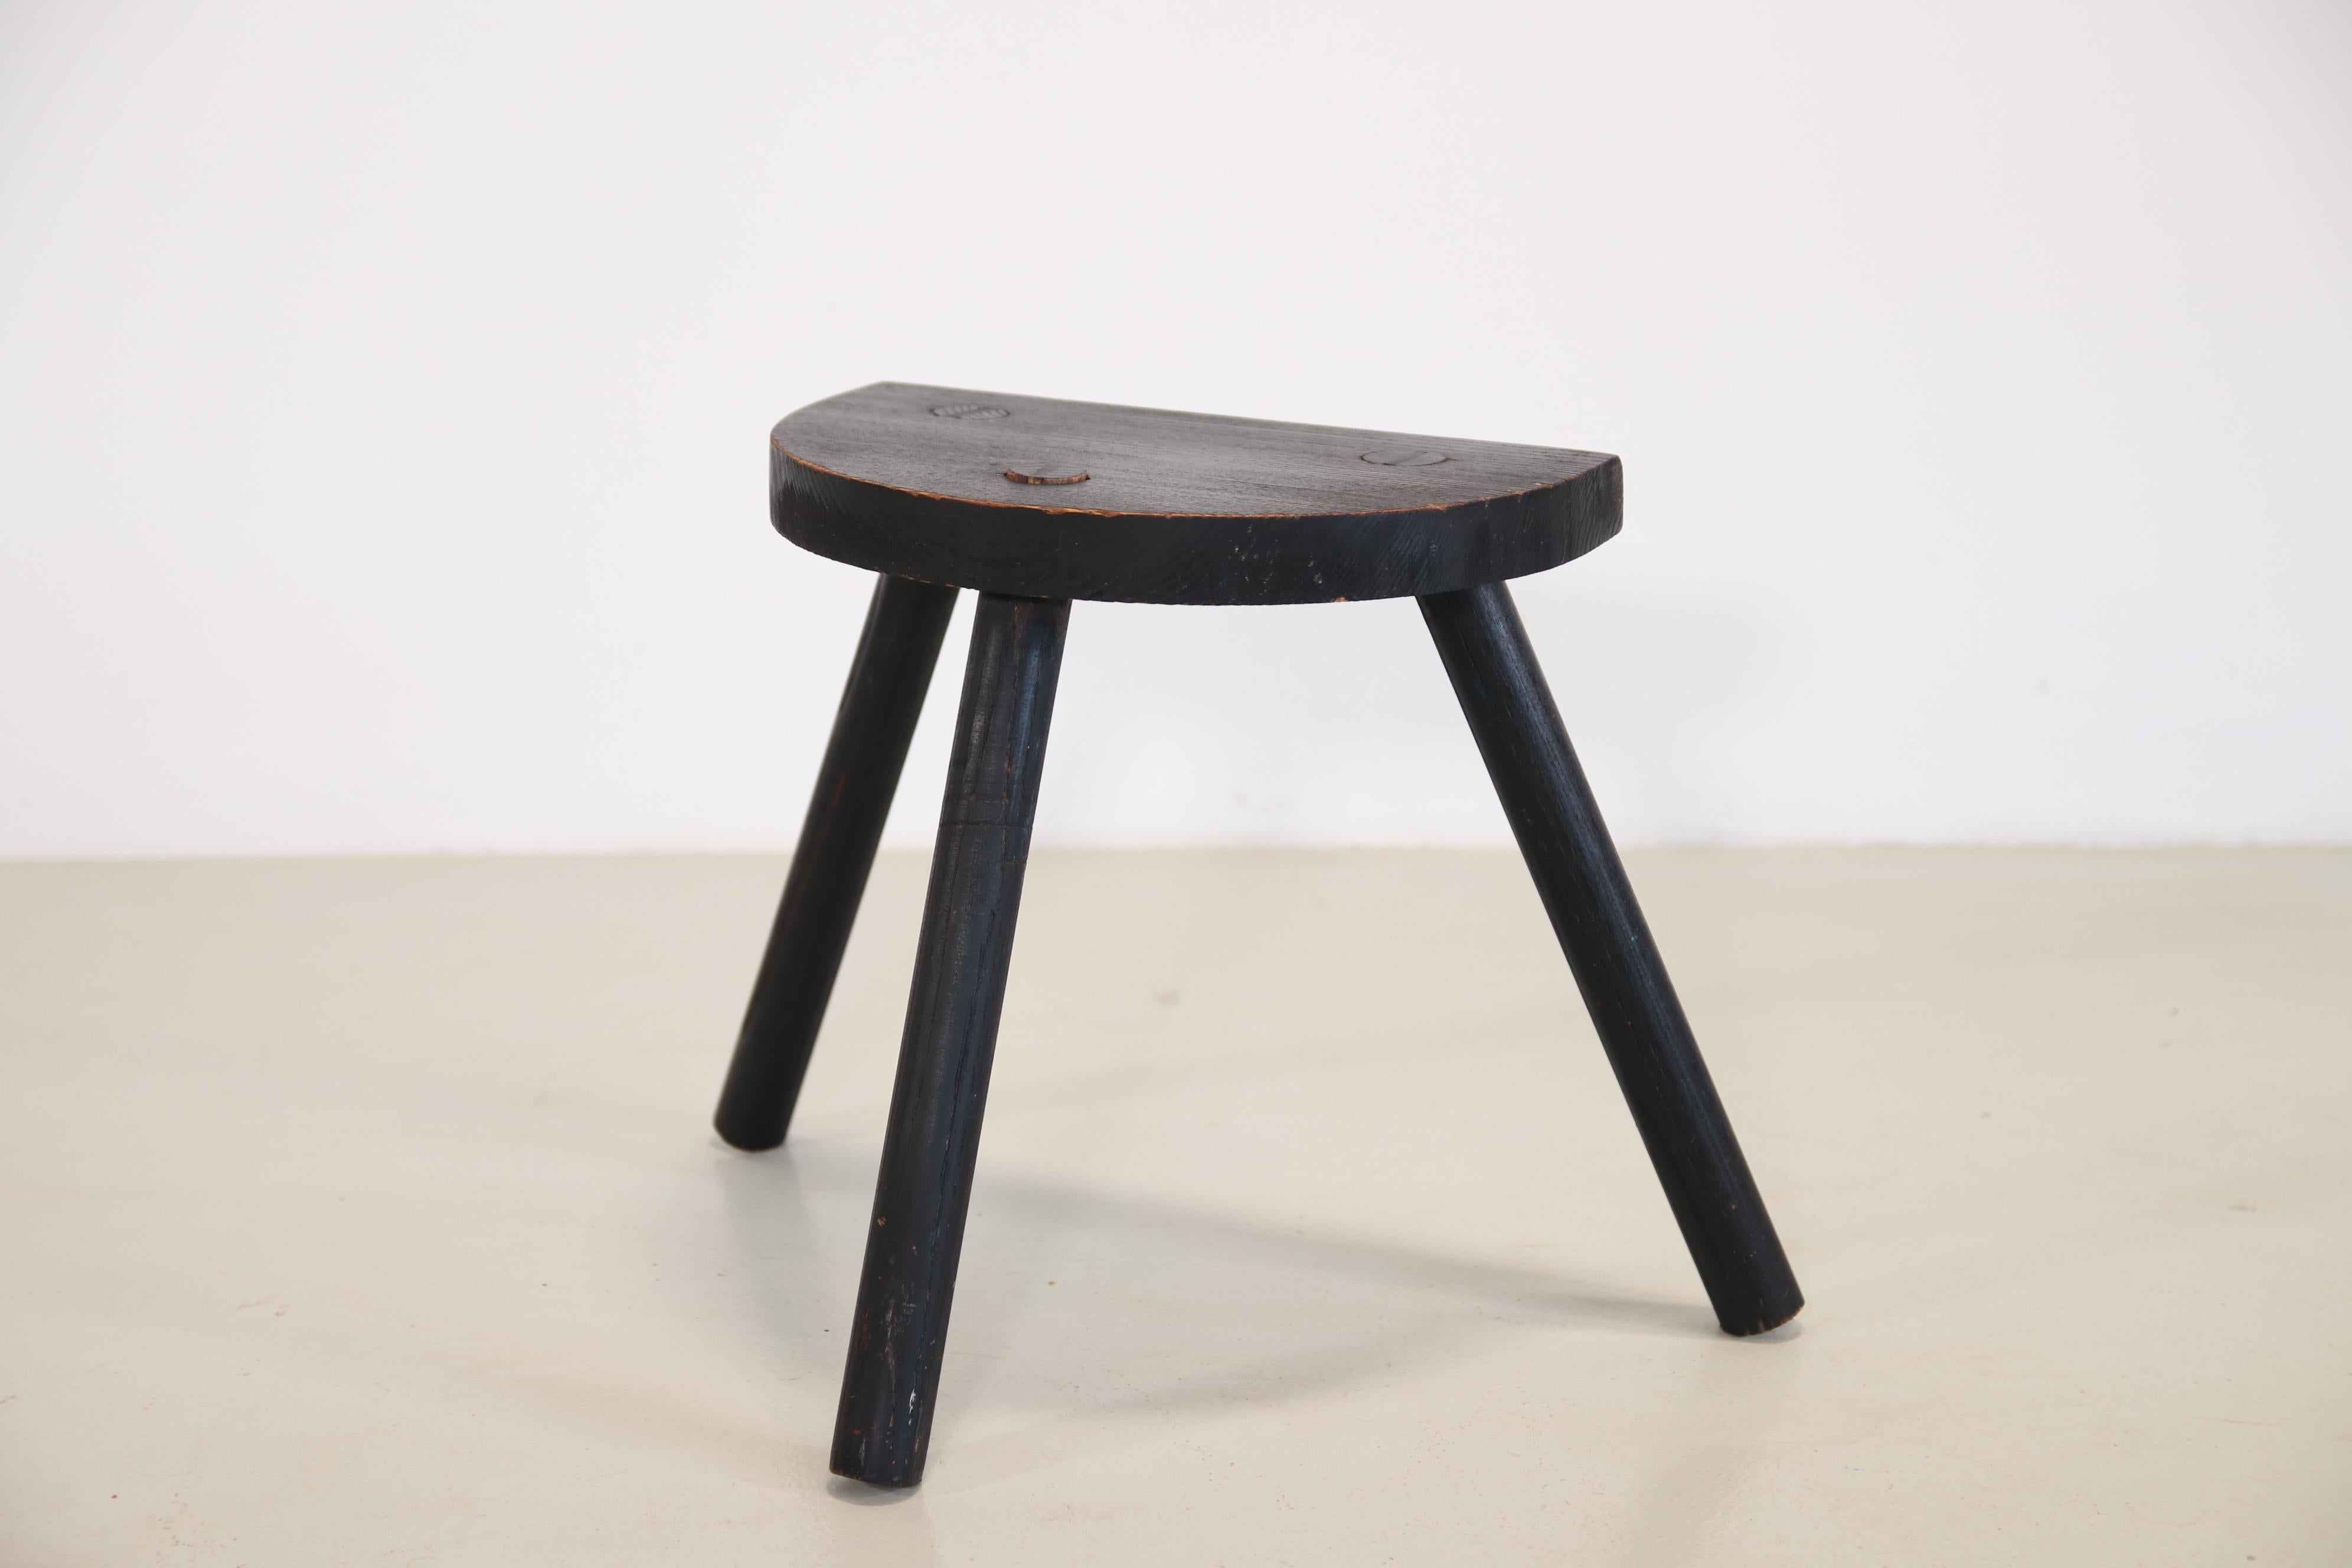 Two old milking stools from France. The stools can be used as side tables or bedside tables and add a lot of atmosphere to a modern interior. A beautiful detail of craftsmanship is the way the legs are attached to the top. The stools are 34.5 cm